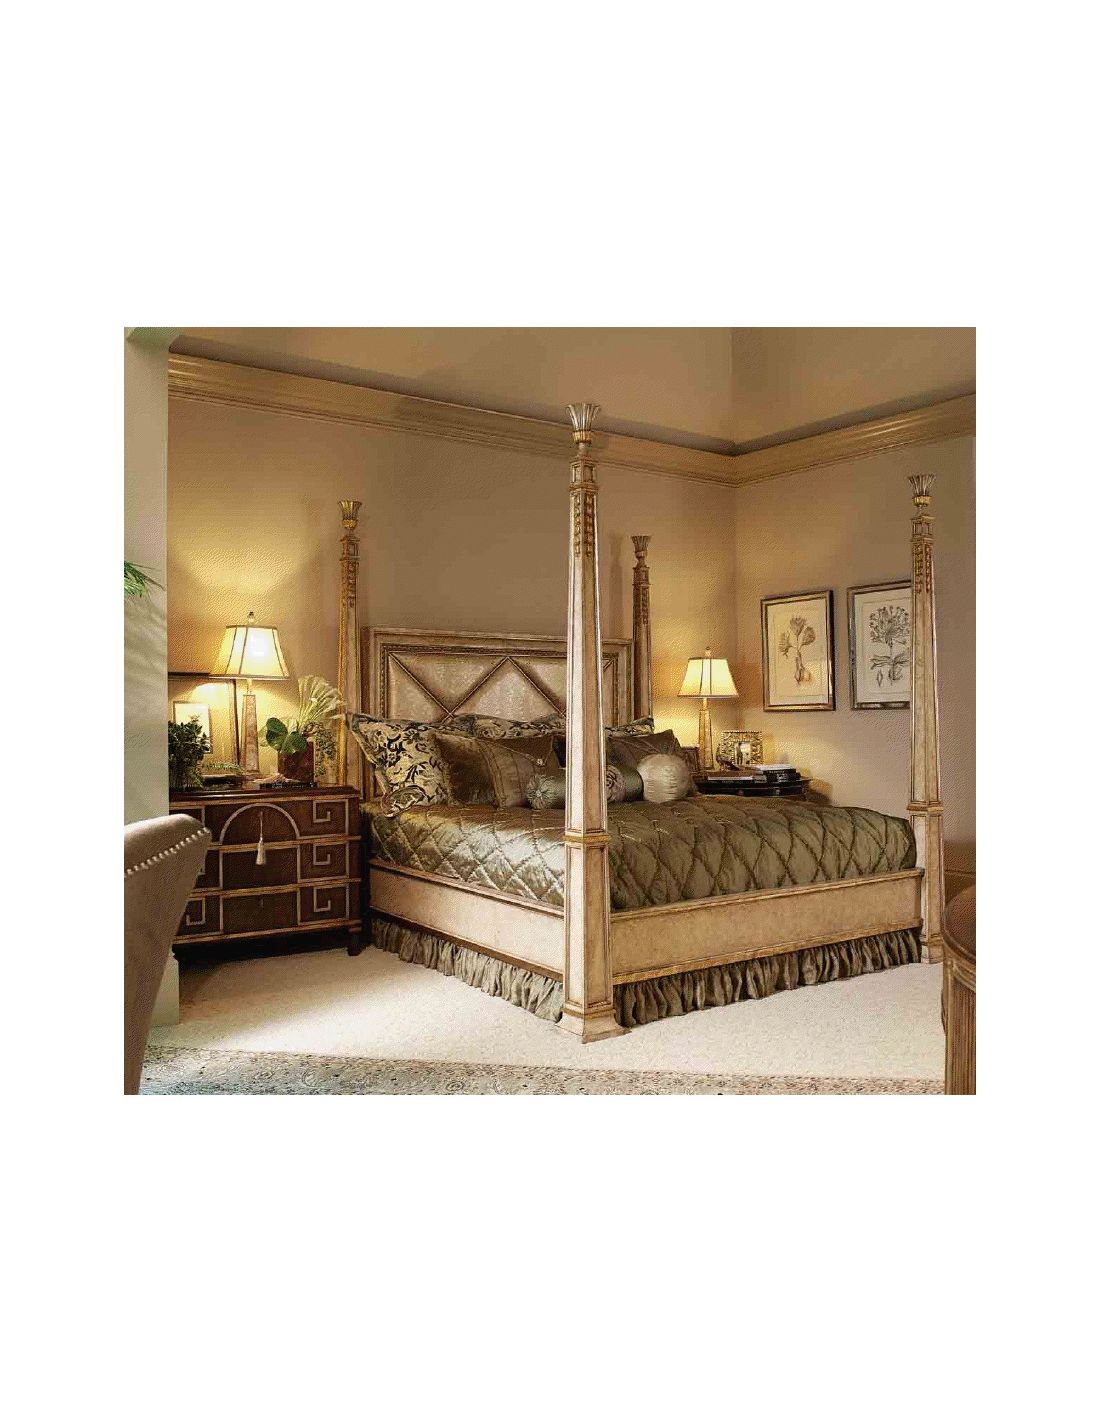 Four Poster Bed Embossed Leather, King Size Bedroom Sets With Leather Headboard